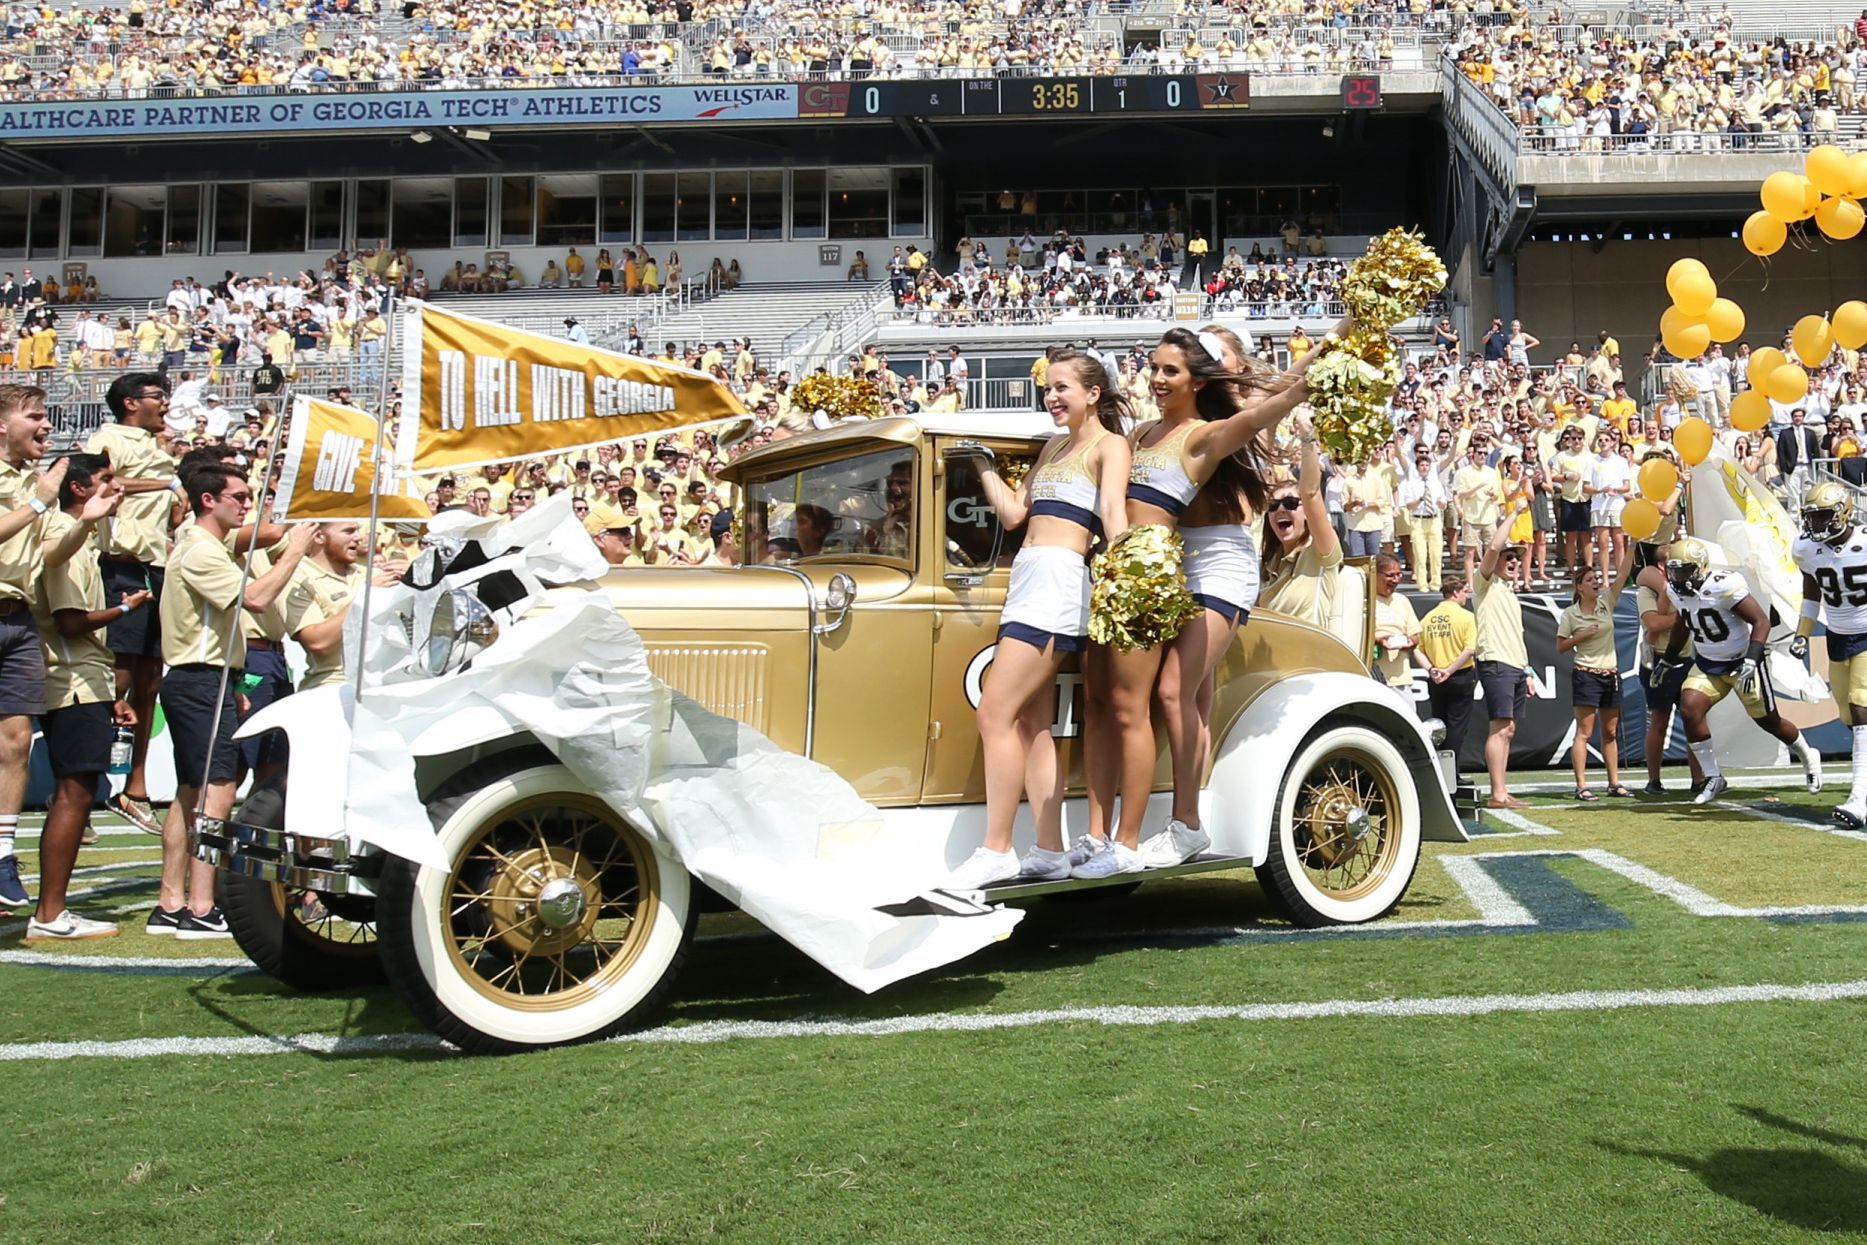 The Georgia Tech Yellow Jackets Ramblin' Wreck drives onto the field before the Jackets' game against the Vanderbilt Commodores at Bobby Dodd Stadium. Jason Getz-USA TODAY Sports